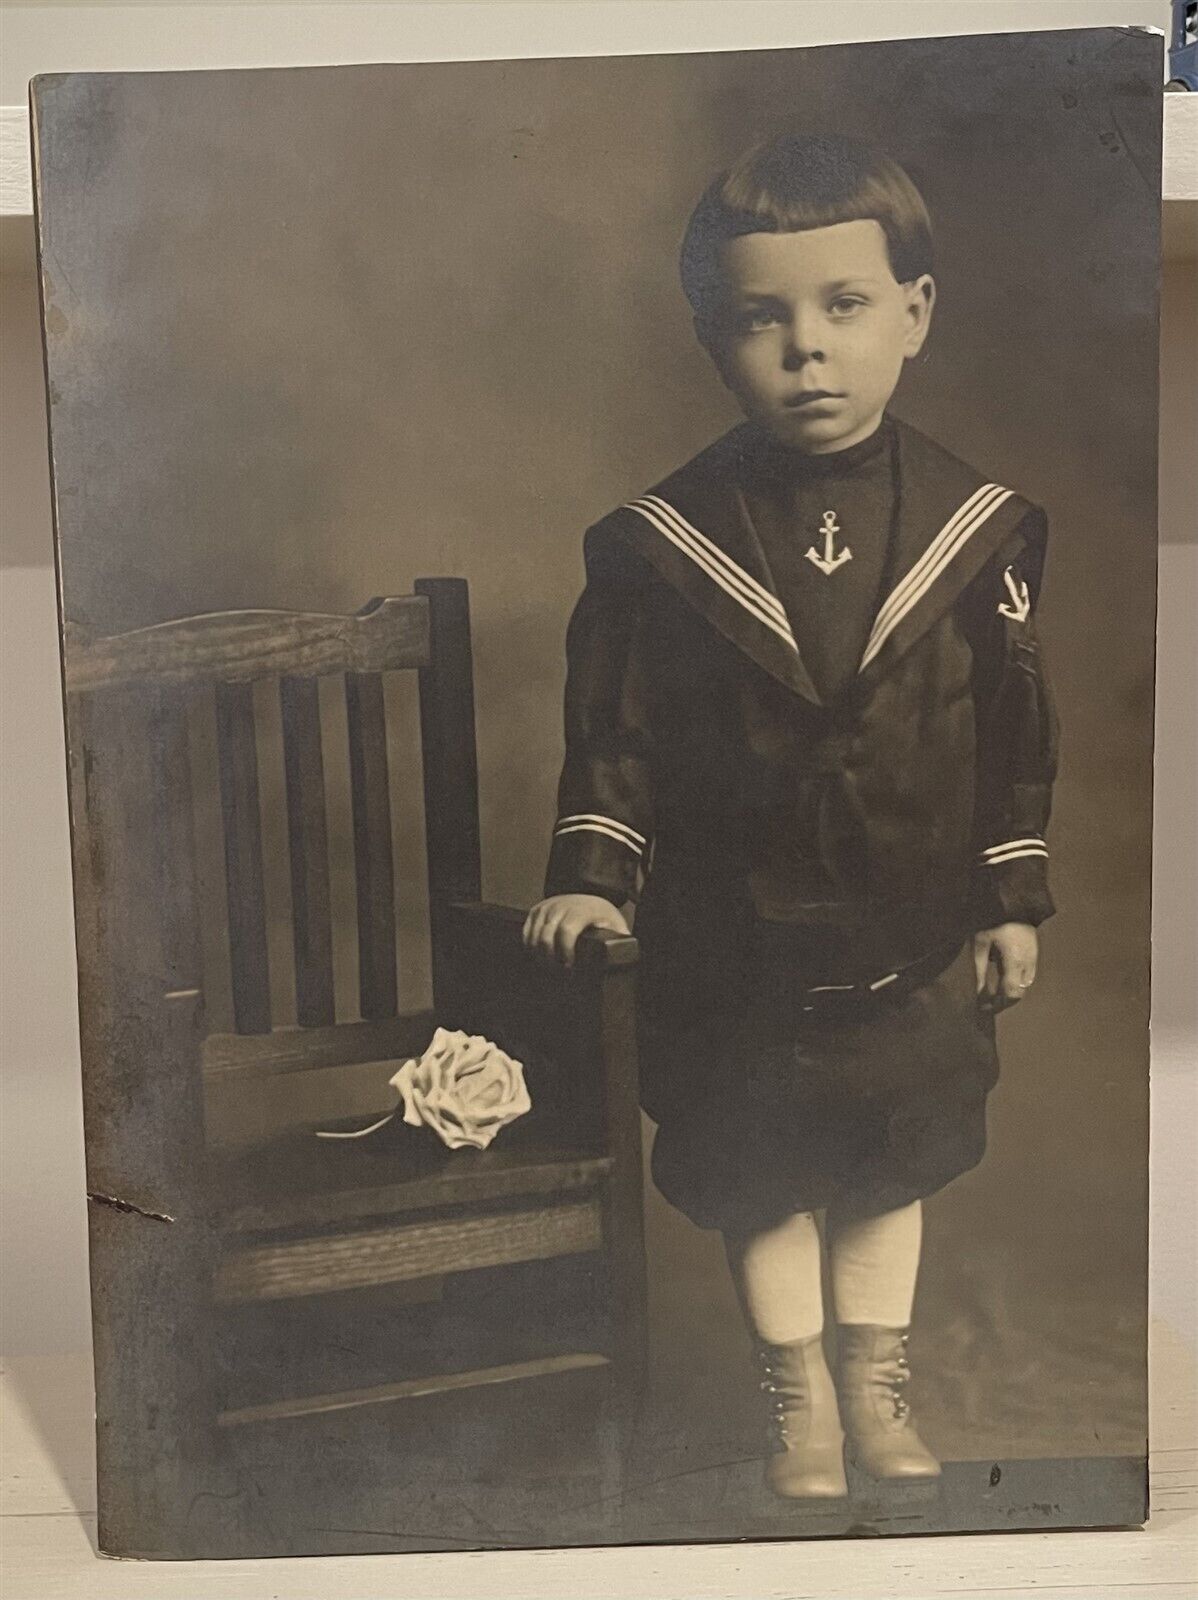 Antique Large Photograph Of A Rose and A Young Boy In Amazing Sailor Suit